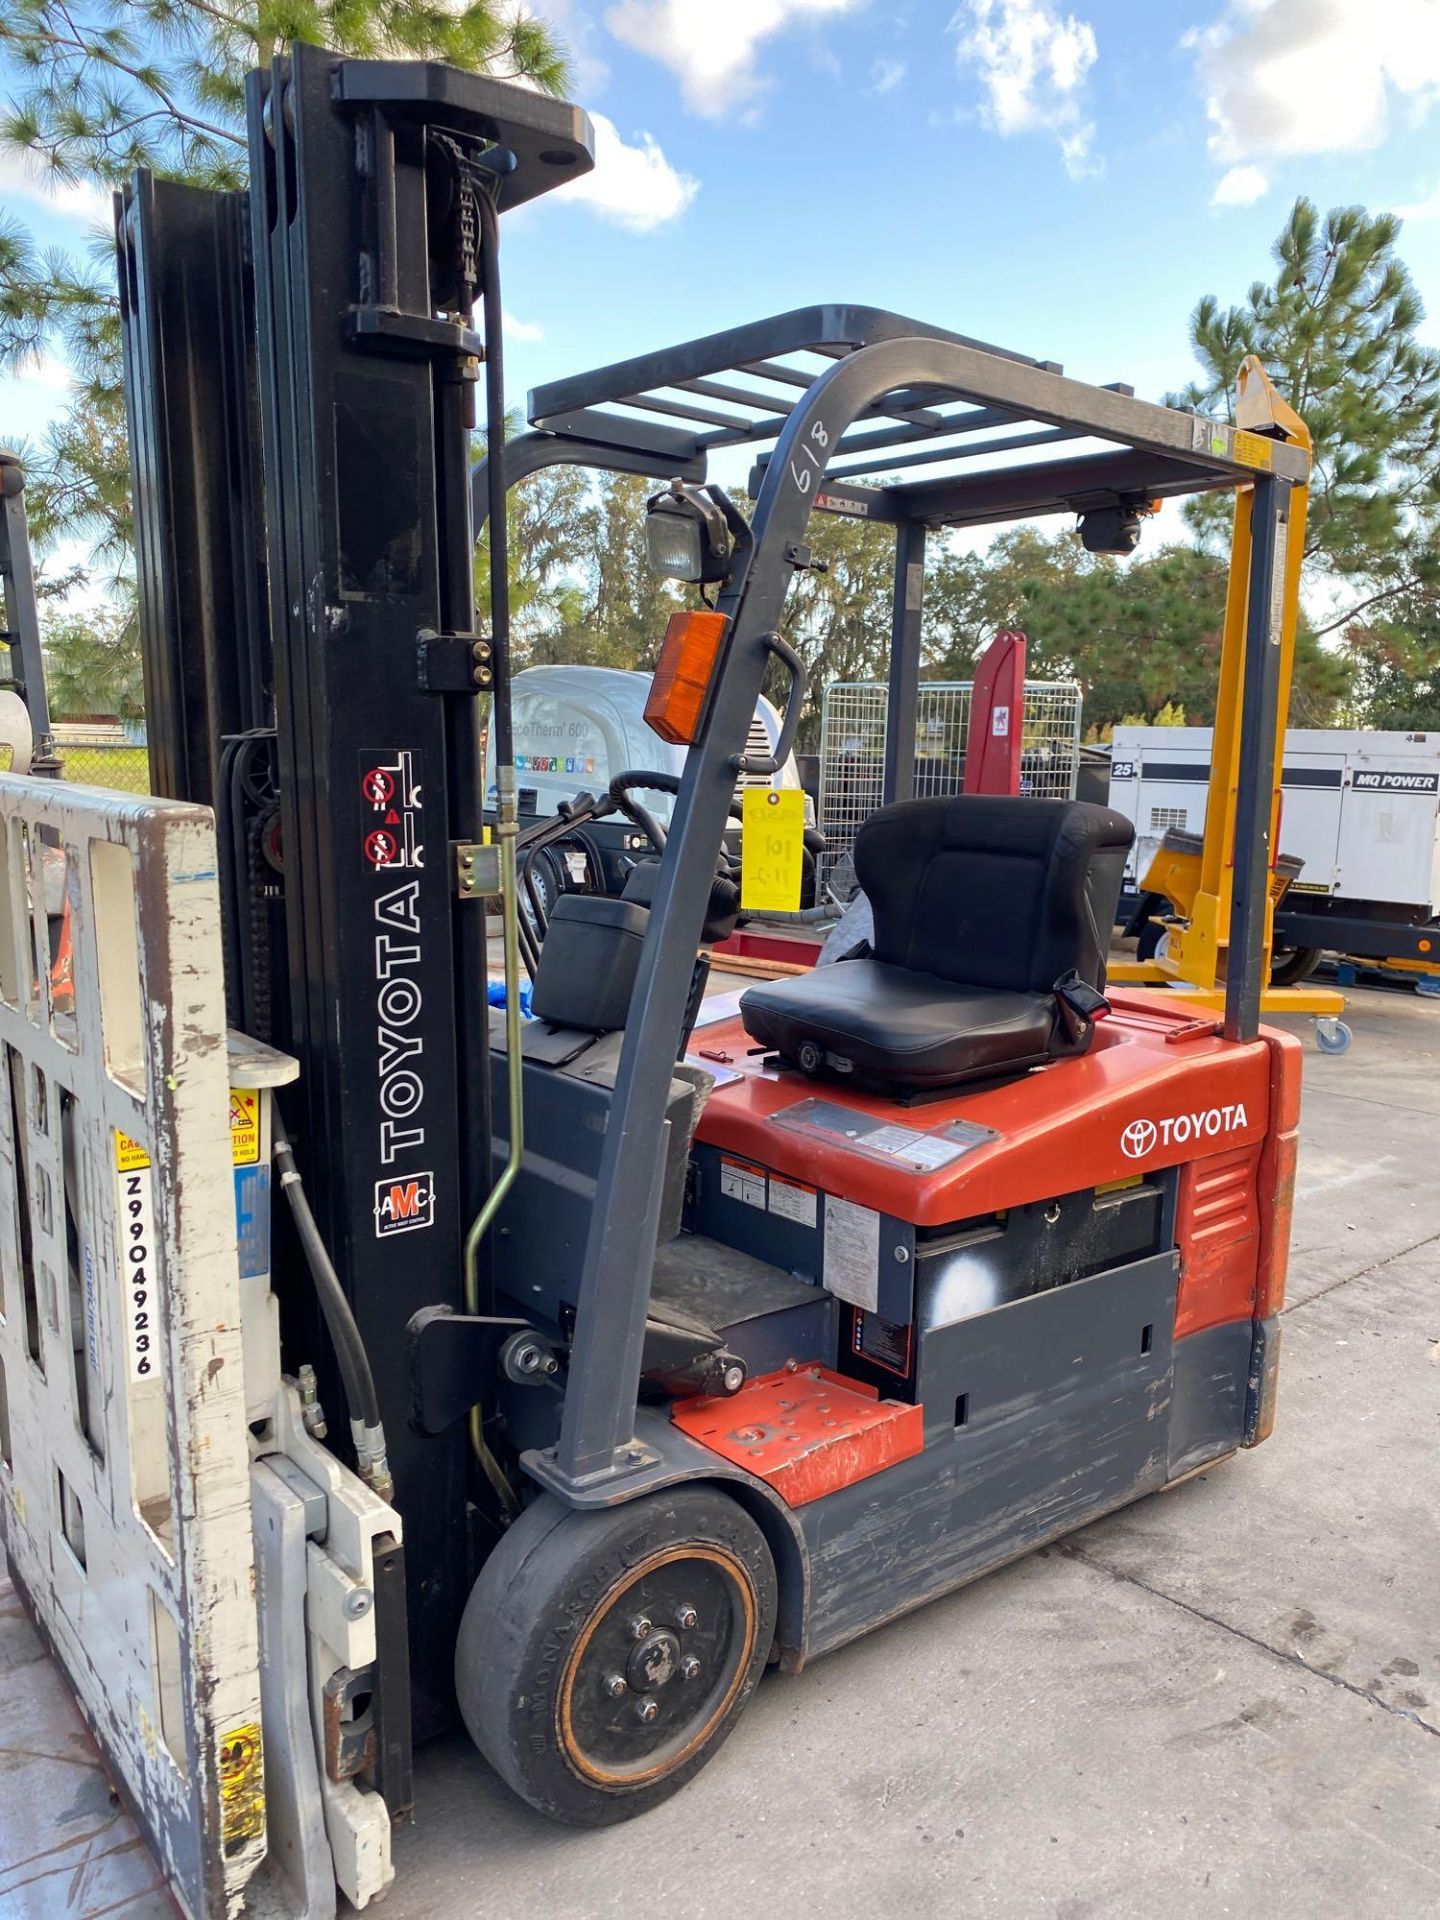 TOYOTA ELECTRIC FORKLIFT MODEL 7FBEU20, 4,000 LB CAPACITY, CASCADE PUSH/PULL ATTACHMENT, TILT, SIDE - Image 3 of 12